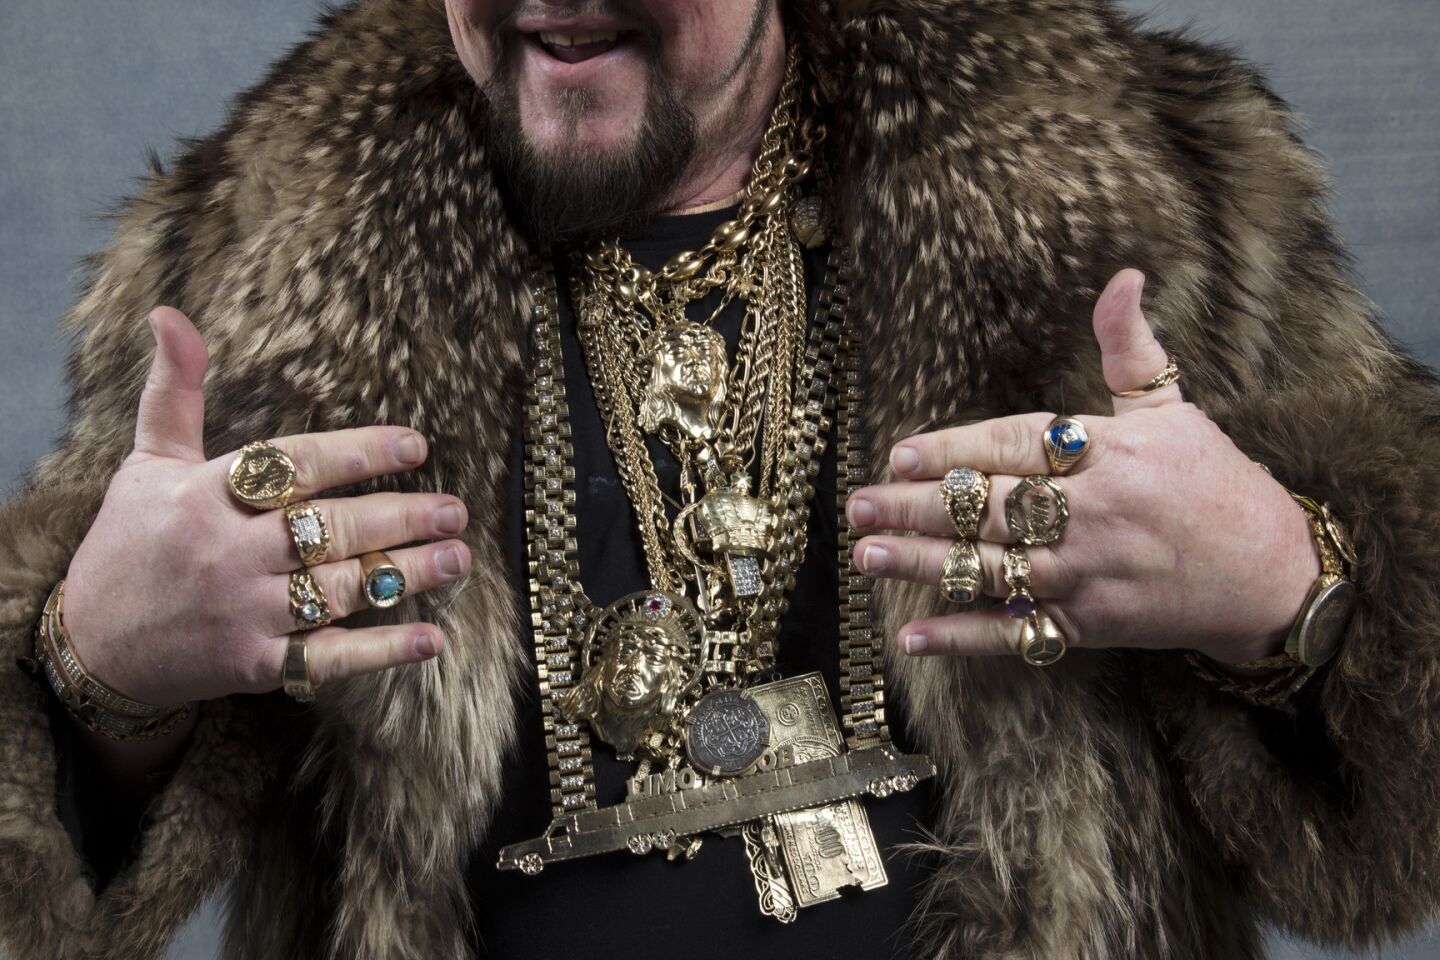 Limo Bob and his bling from the film "Generation Wealth," photographed in the L.A. Times studio at Chase Sapphire on Main in Park City, Utah. FULL COVERAGE: Sundance Film Festival 2018 »